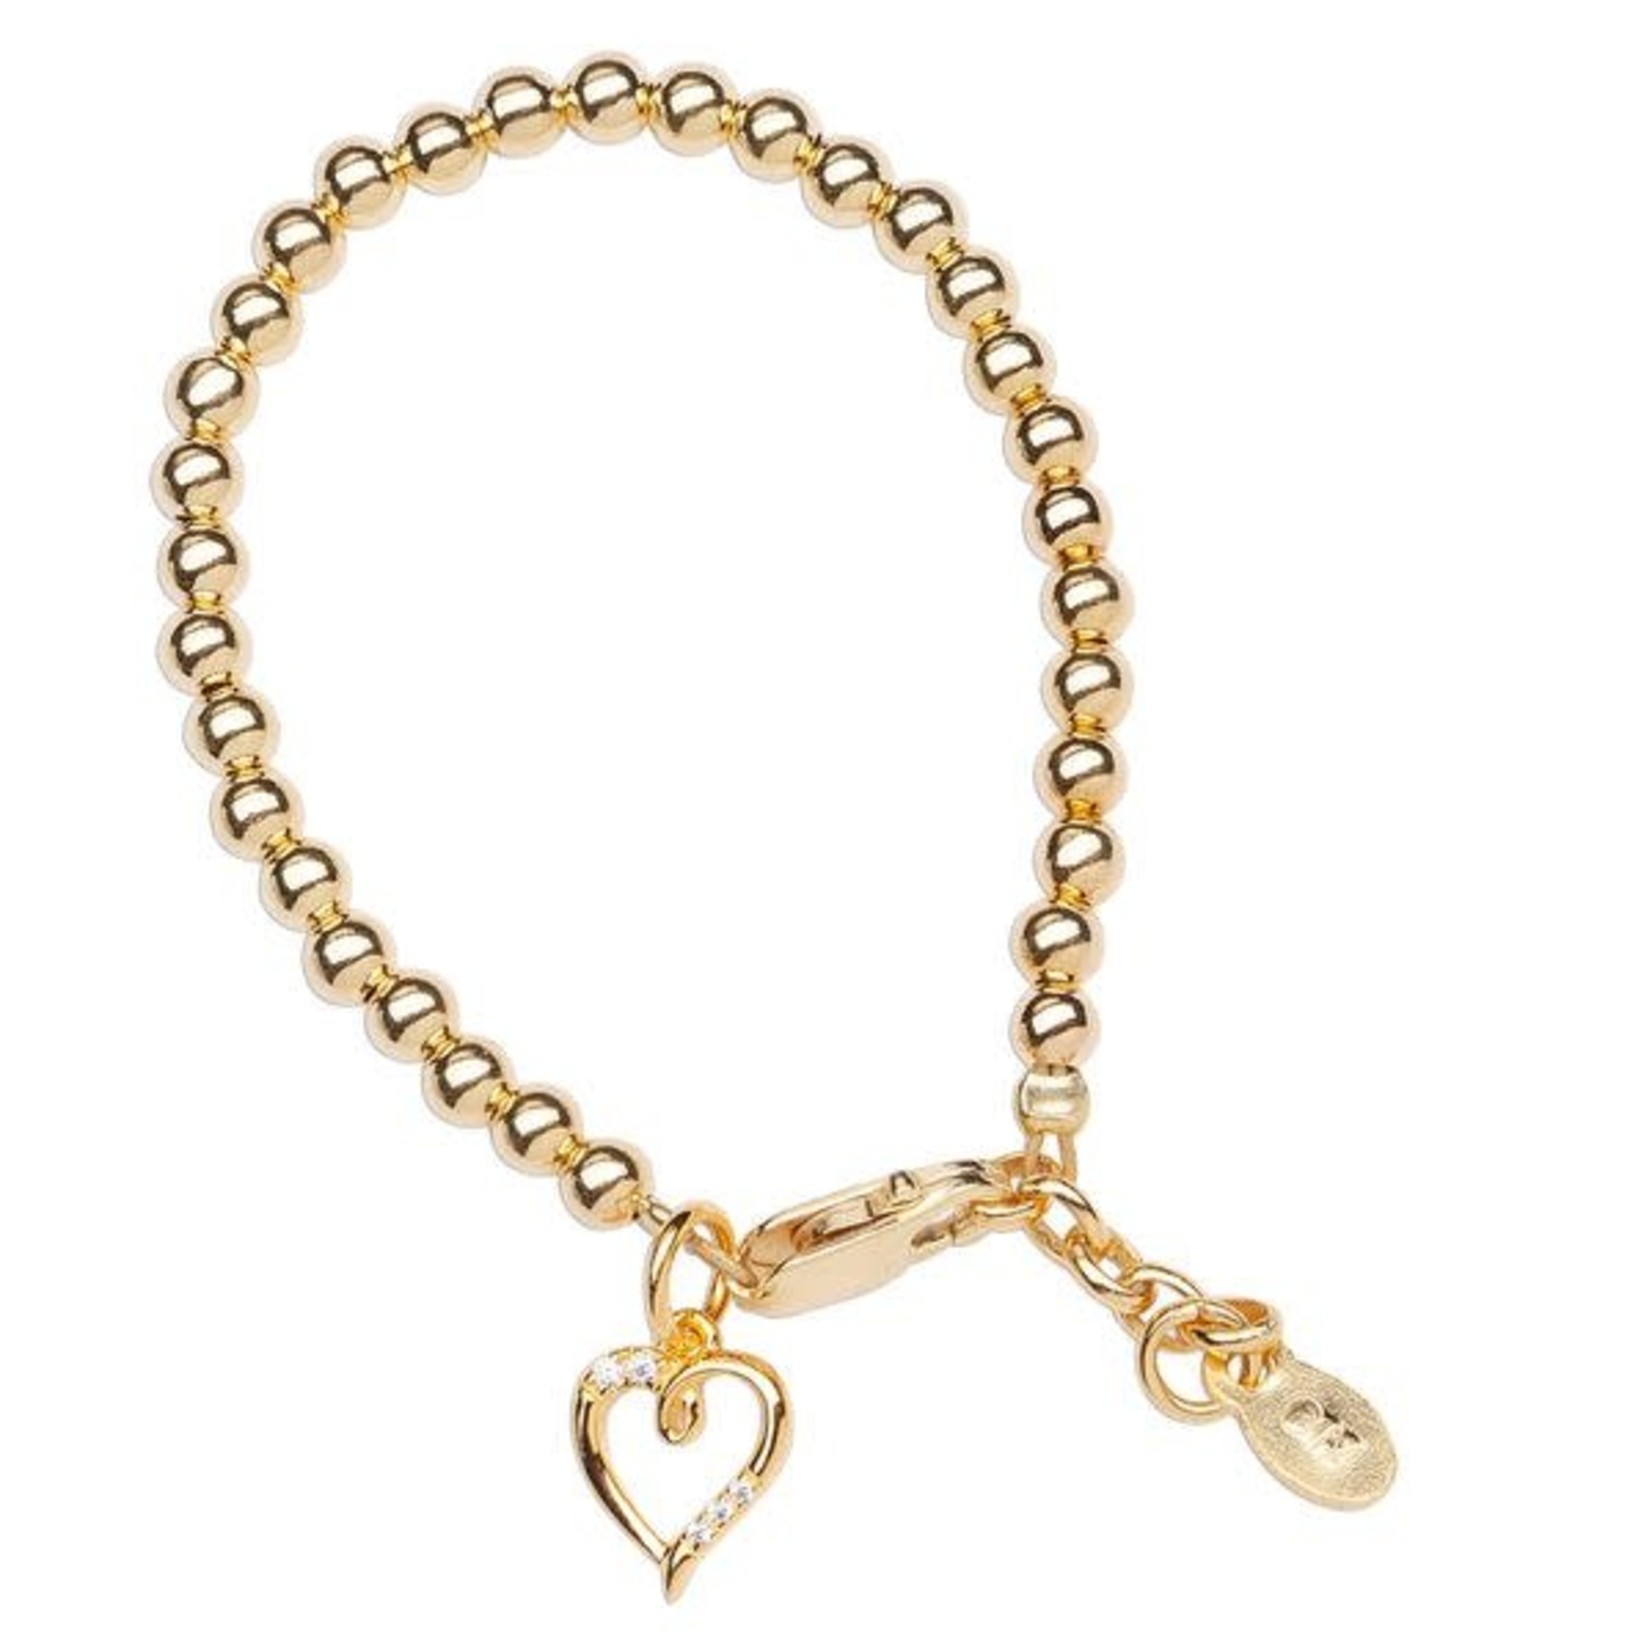 Cherished Moments Aria - M (1-5y) 14K Gold Plated Bracelet with Heart